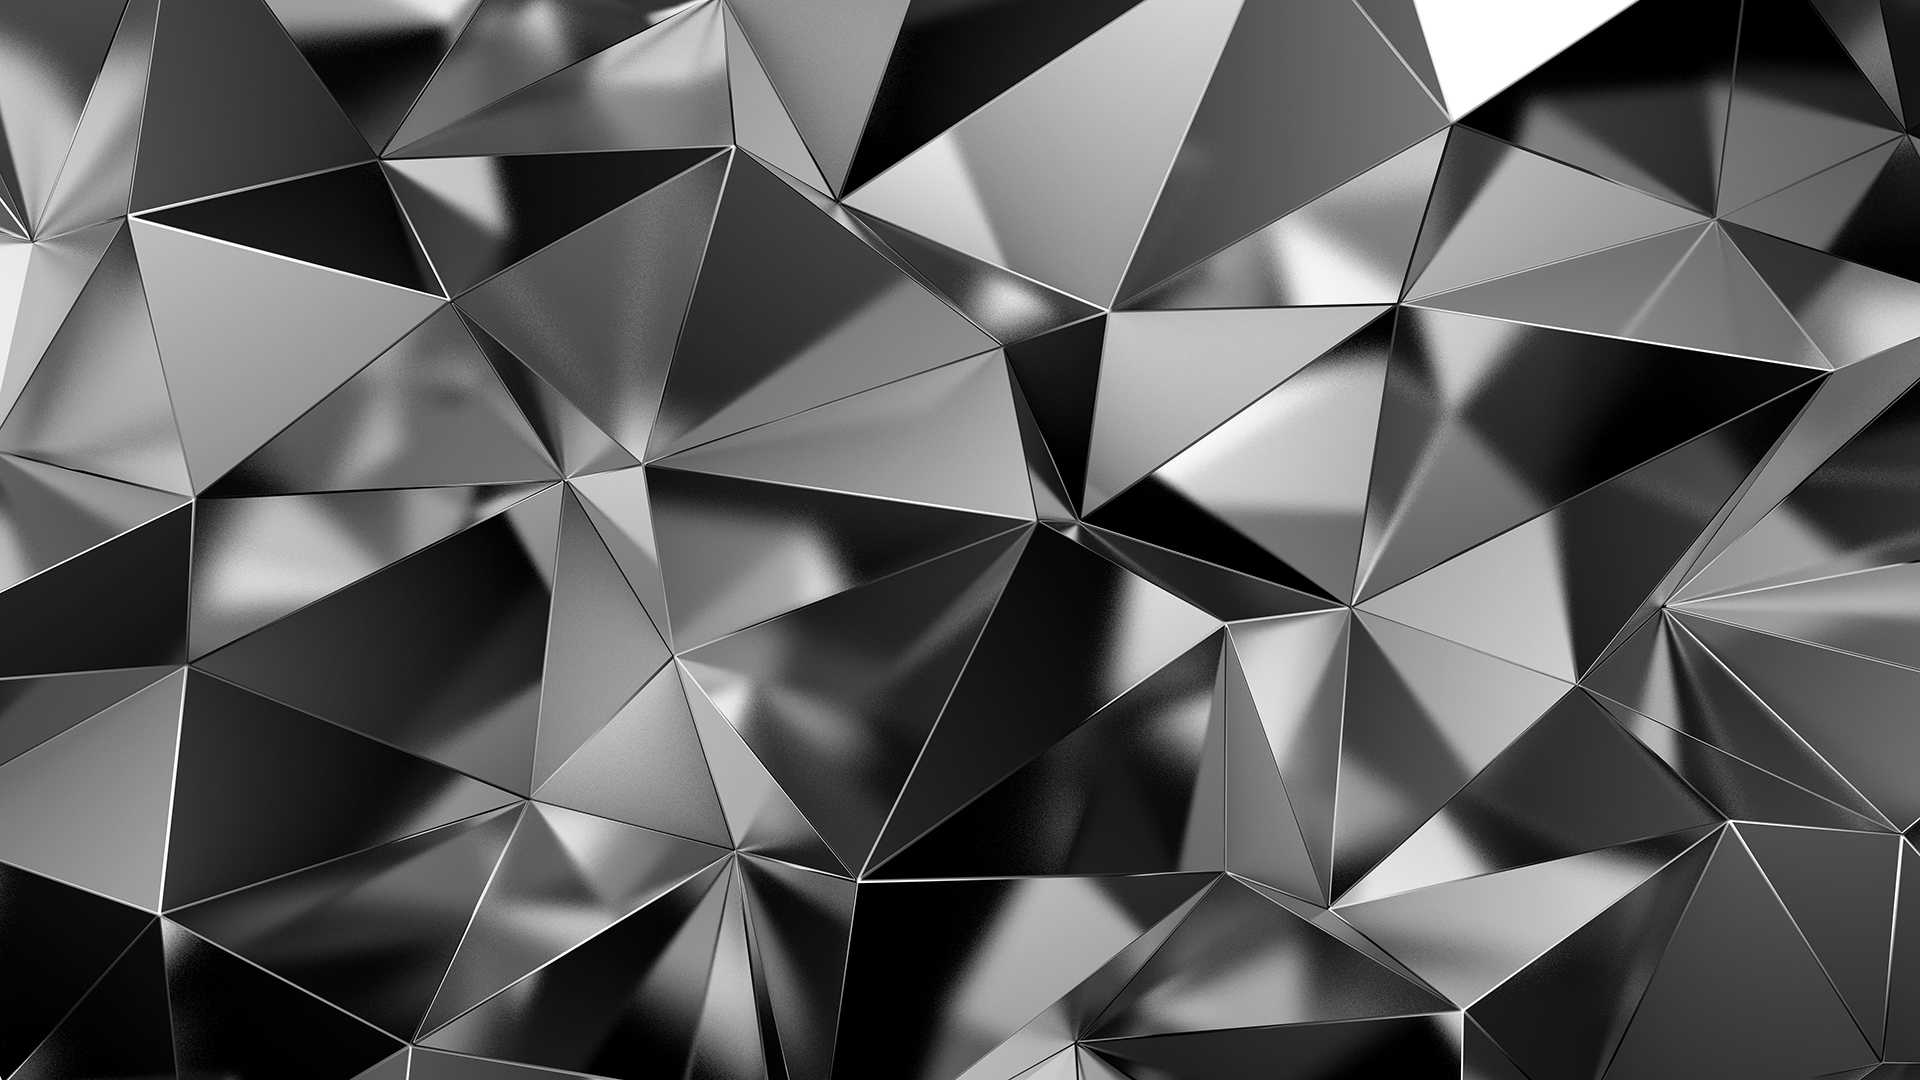 Abstract image of geometric metal textures 